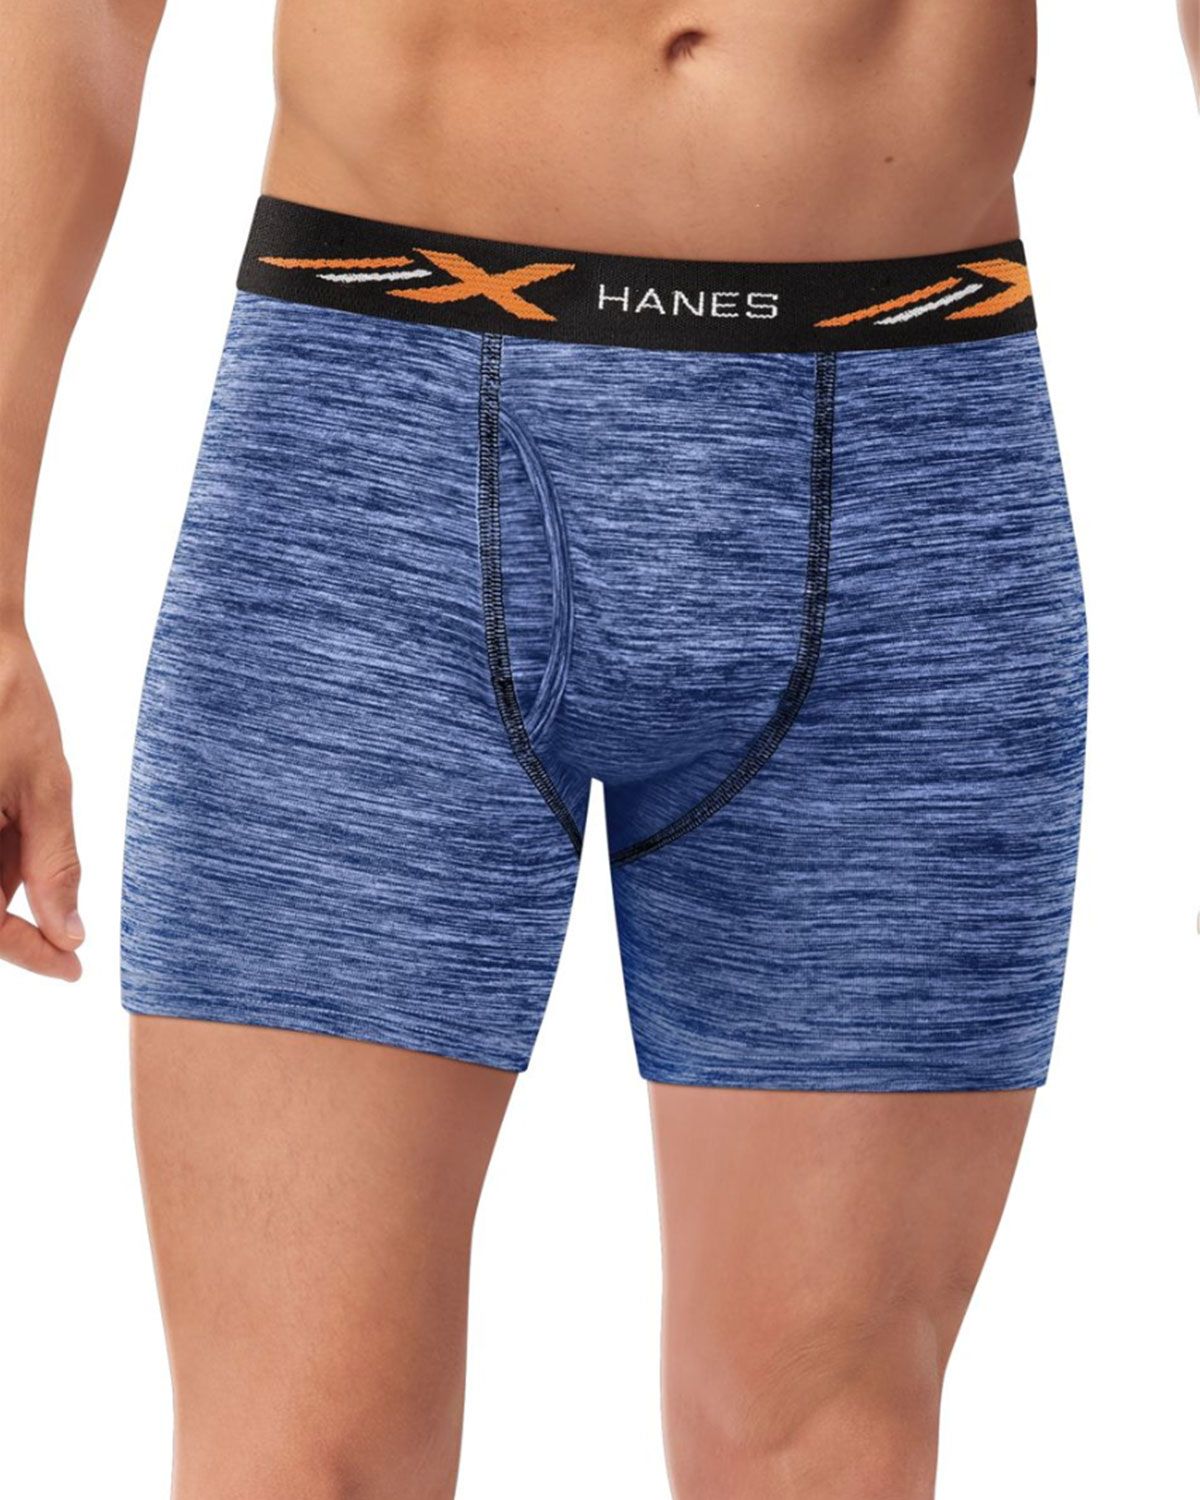 UPC 738994838322 product image for Hanes XTMBA4 Men's X-Temp Performance Space Dye Boxer Briefs 4-Pack - Assorted - | upcitemdb.com